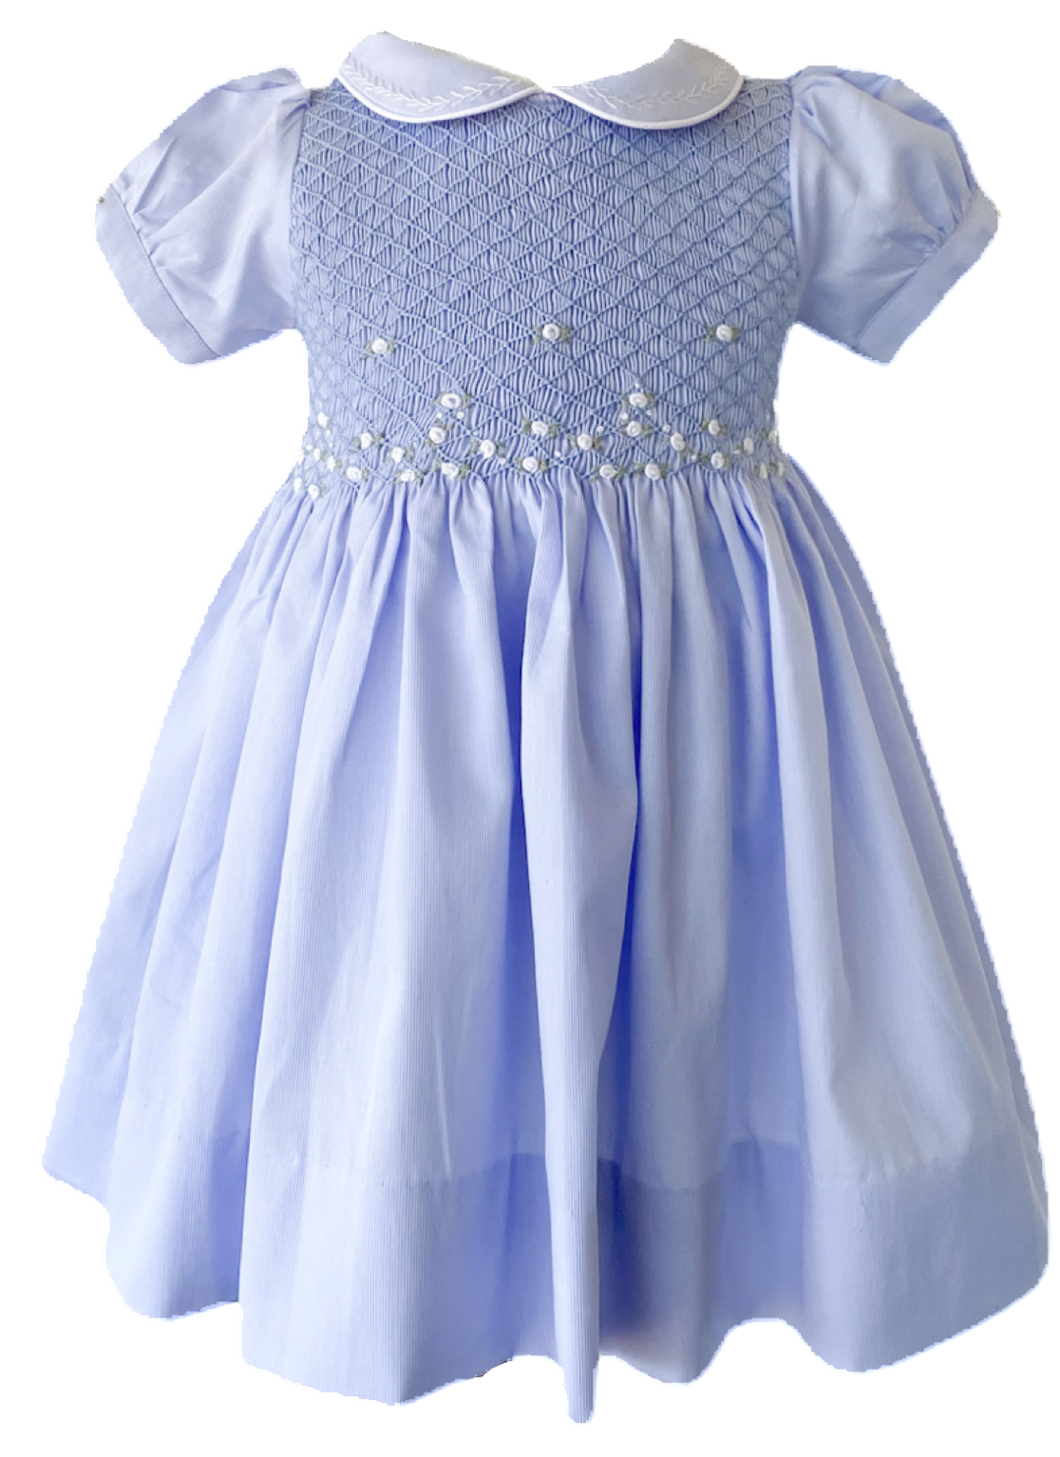 The Smocked Dress - Cottage Garden - 2x Size 3 years remaining!